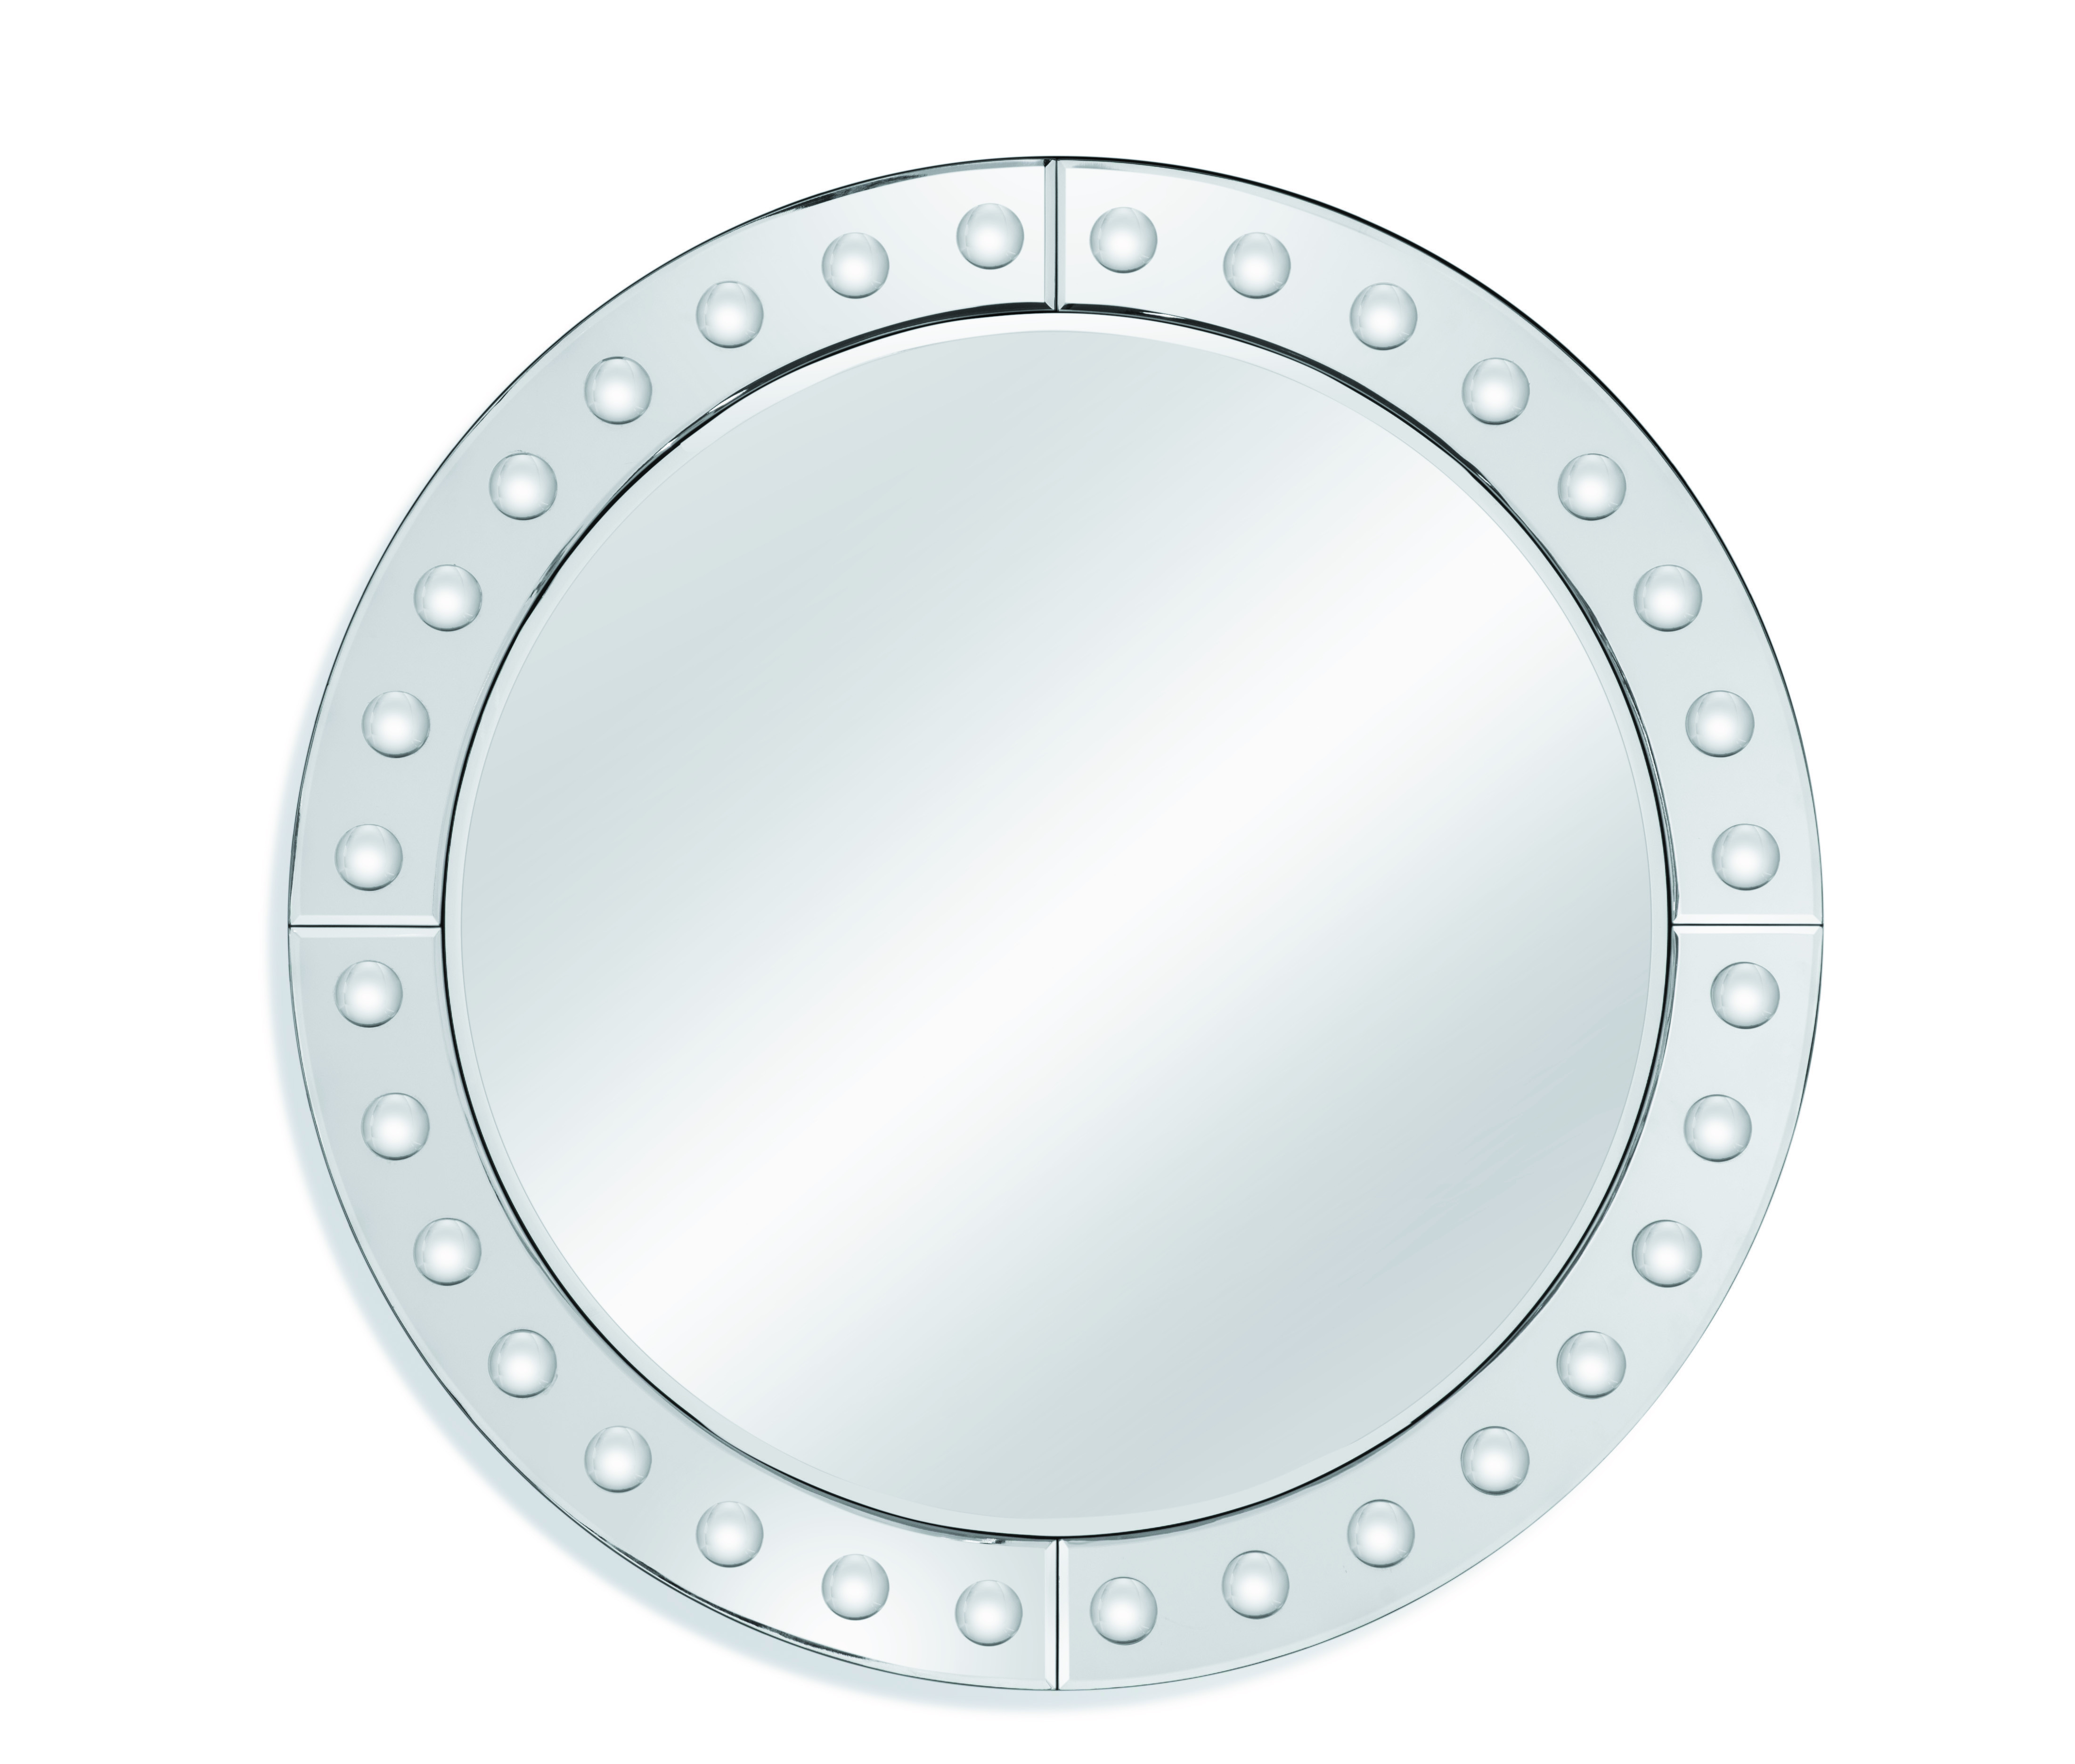 Calisse mirror in silver from Bassett Mirror Company